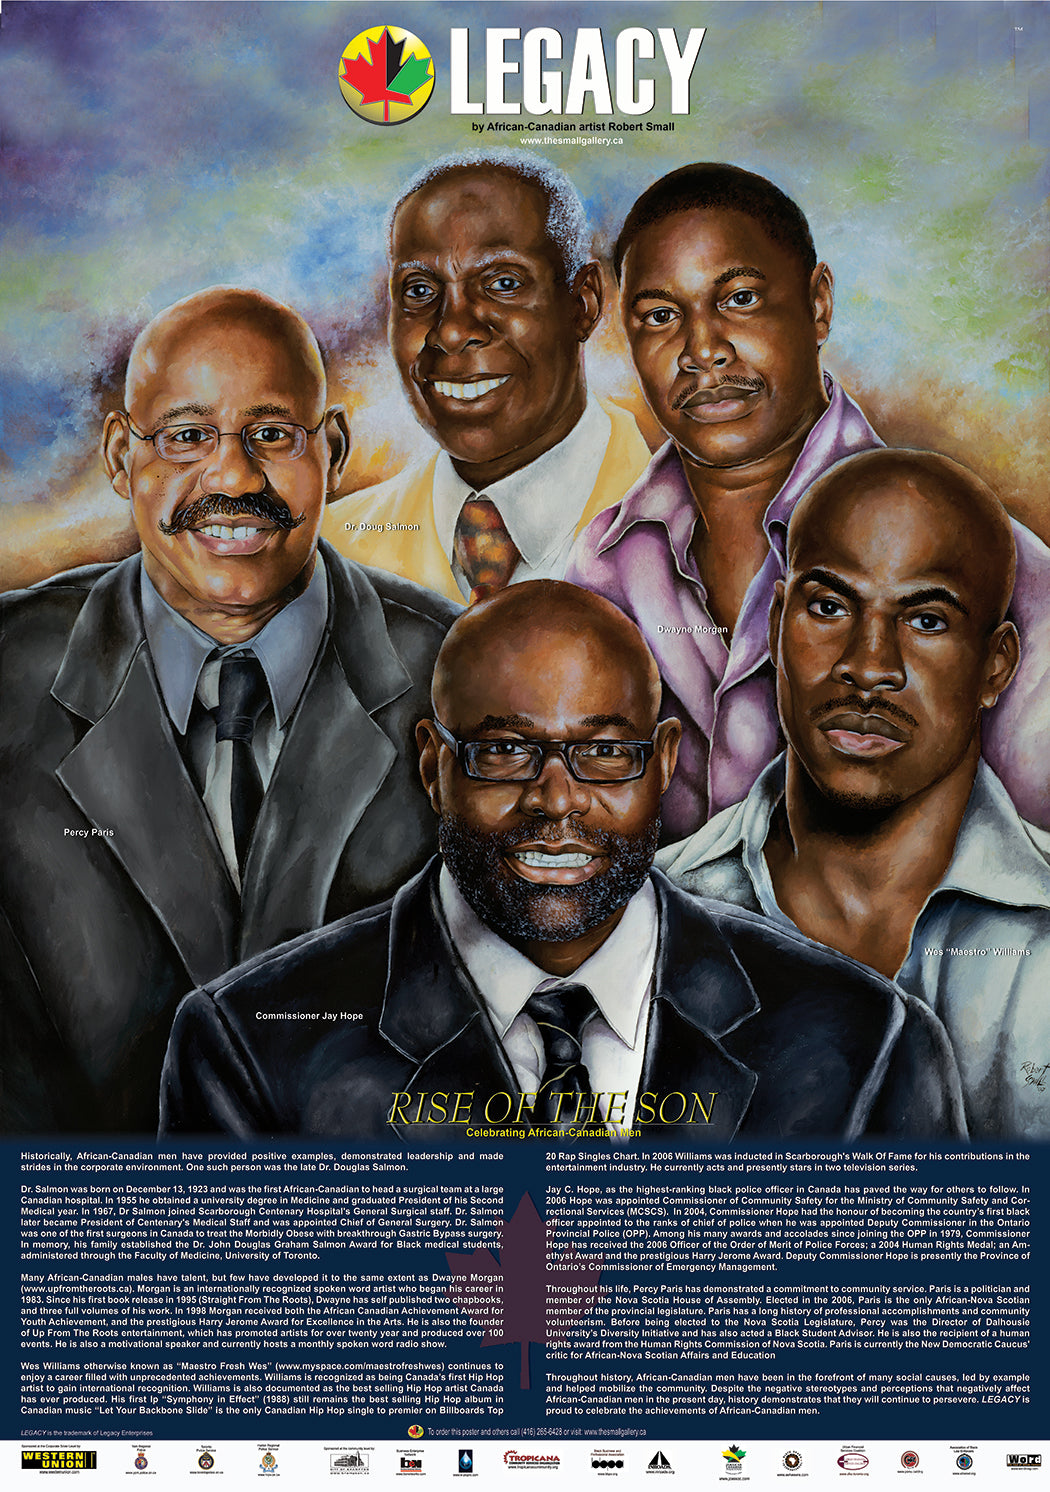 “An educational poster, ideal for Black History Month featuring surgeon Dr. Doug Salmon, spoken word artist, Dwane Morgan, Hip Hop artist Wes “maestro” Williams, police officer Jay Hope, and politician Percy Paris created by African-Canadian artist Robert Small.”